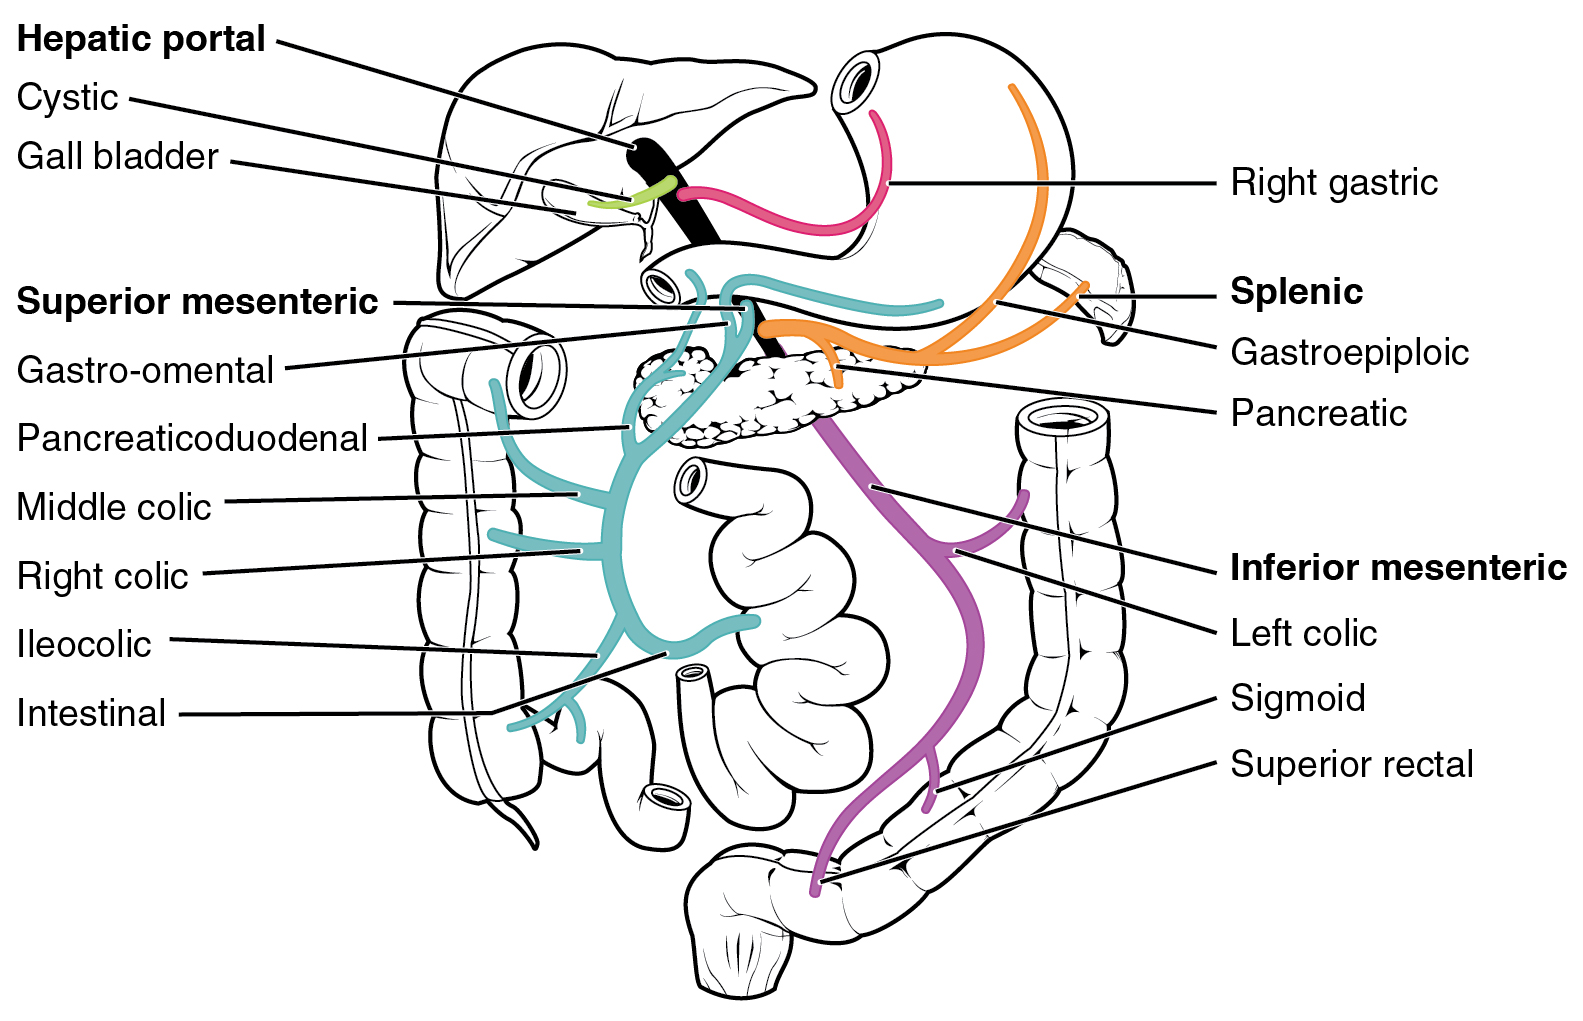 This diagram shows the veins in the digestive system.